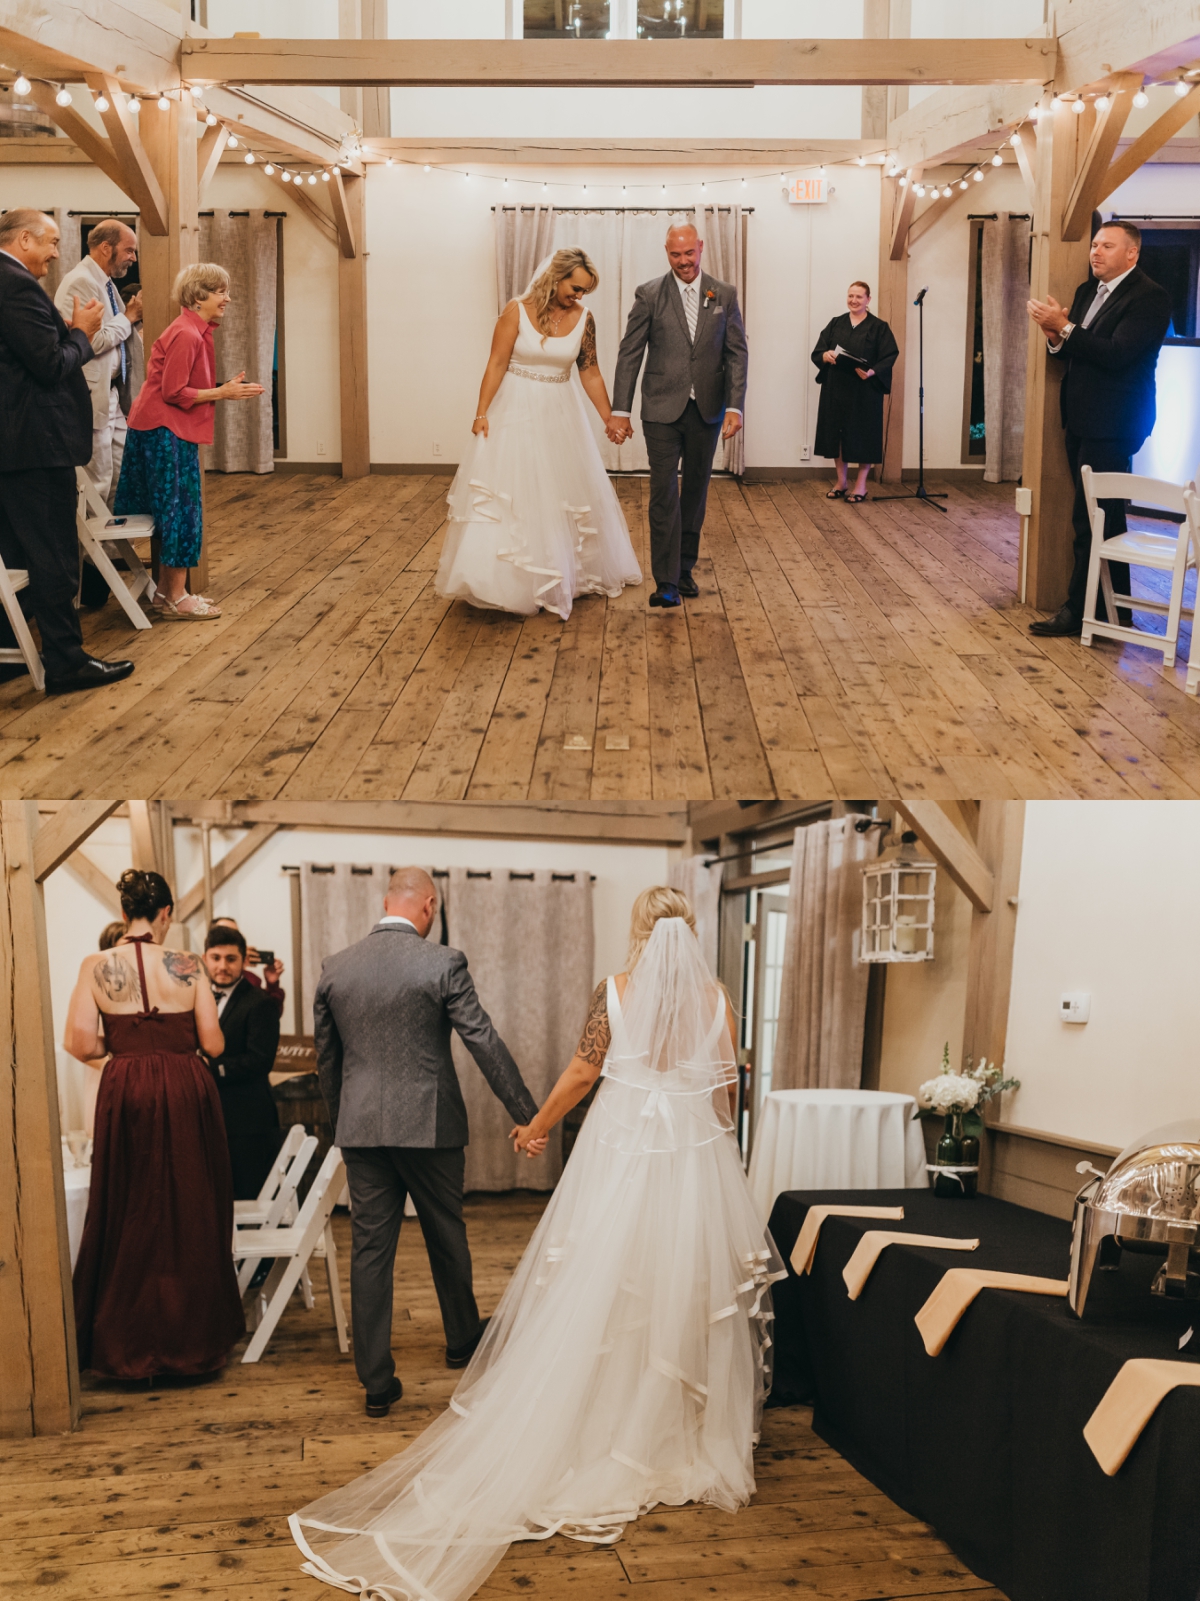 Indoor wedding ceremony at The Barn at Wight Farm